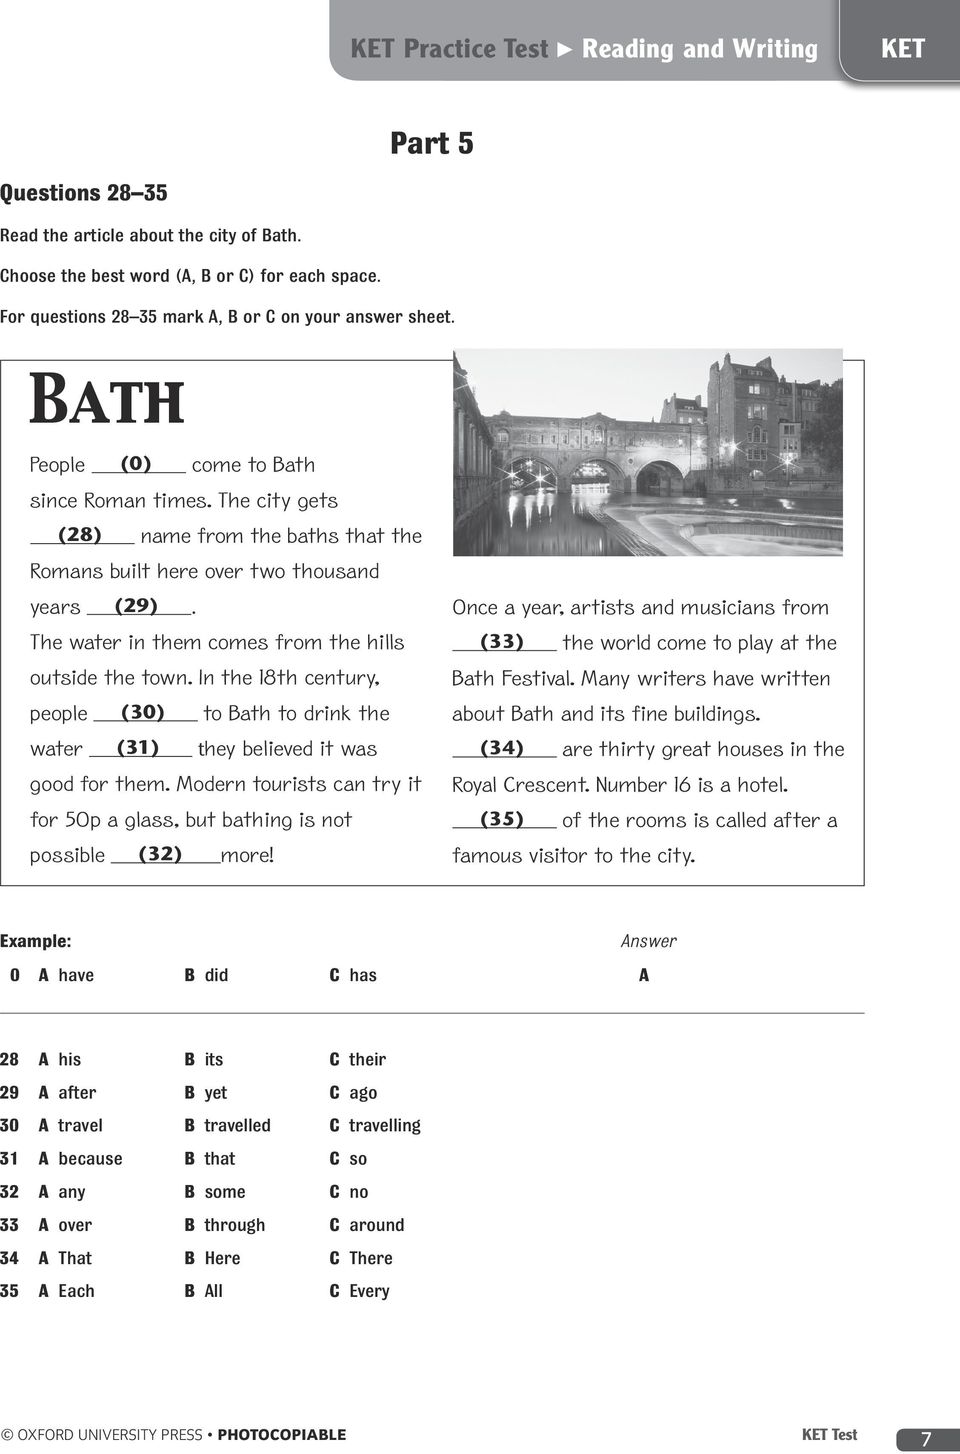 In the 18th century, people (30) to Bath to drink the water (31) they believed it was good for them. Modern tourists can try it for 50p a glass, but bathing is not possible (32) more!